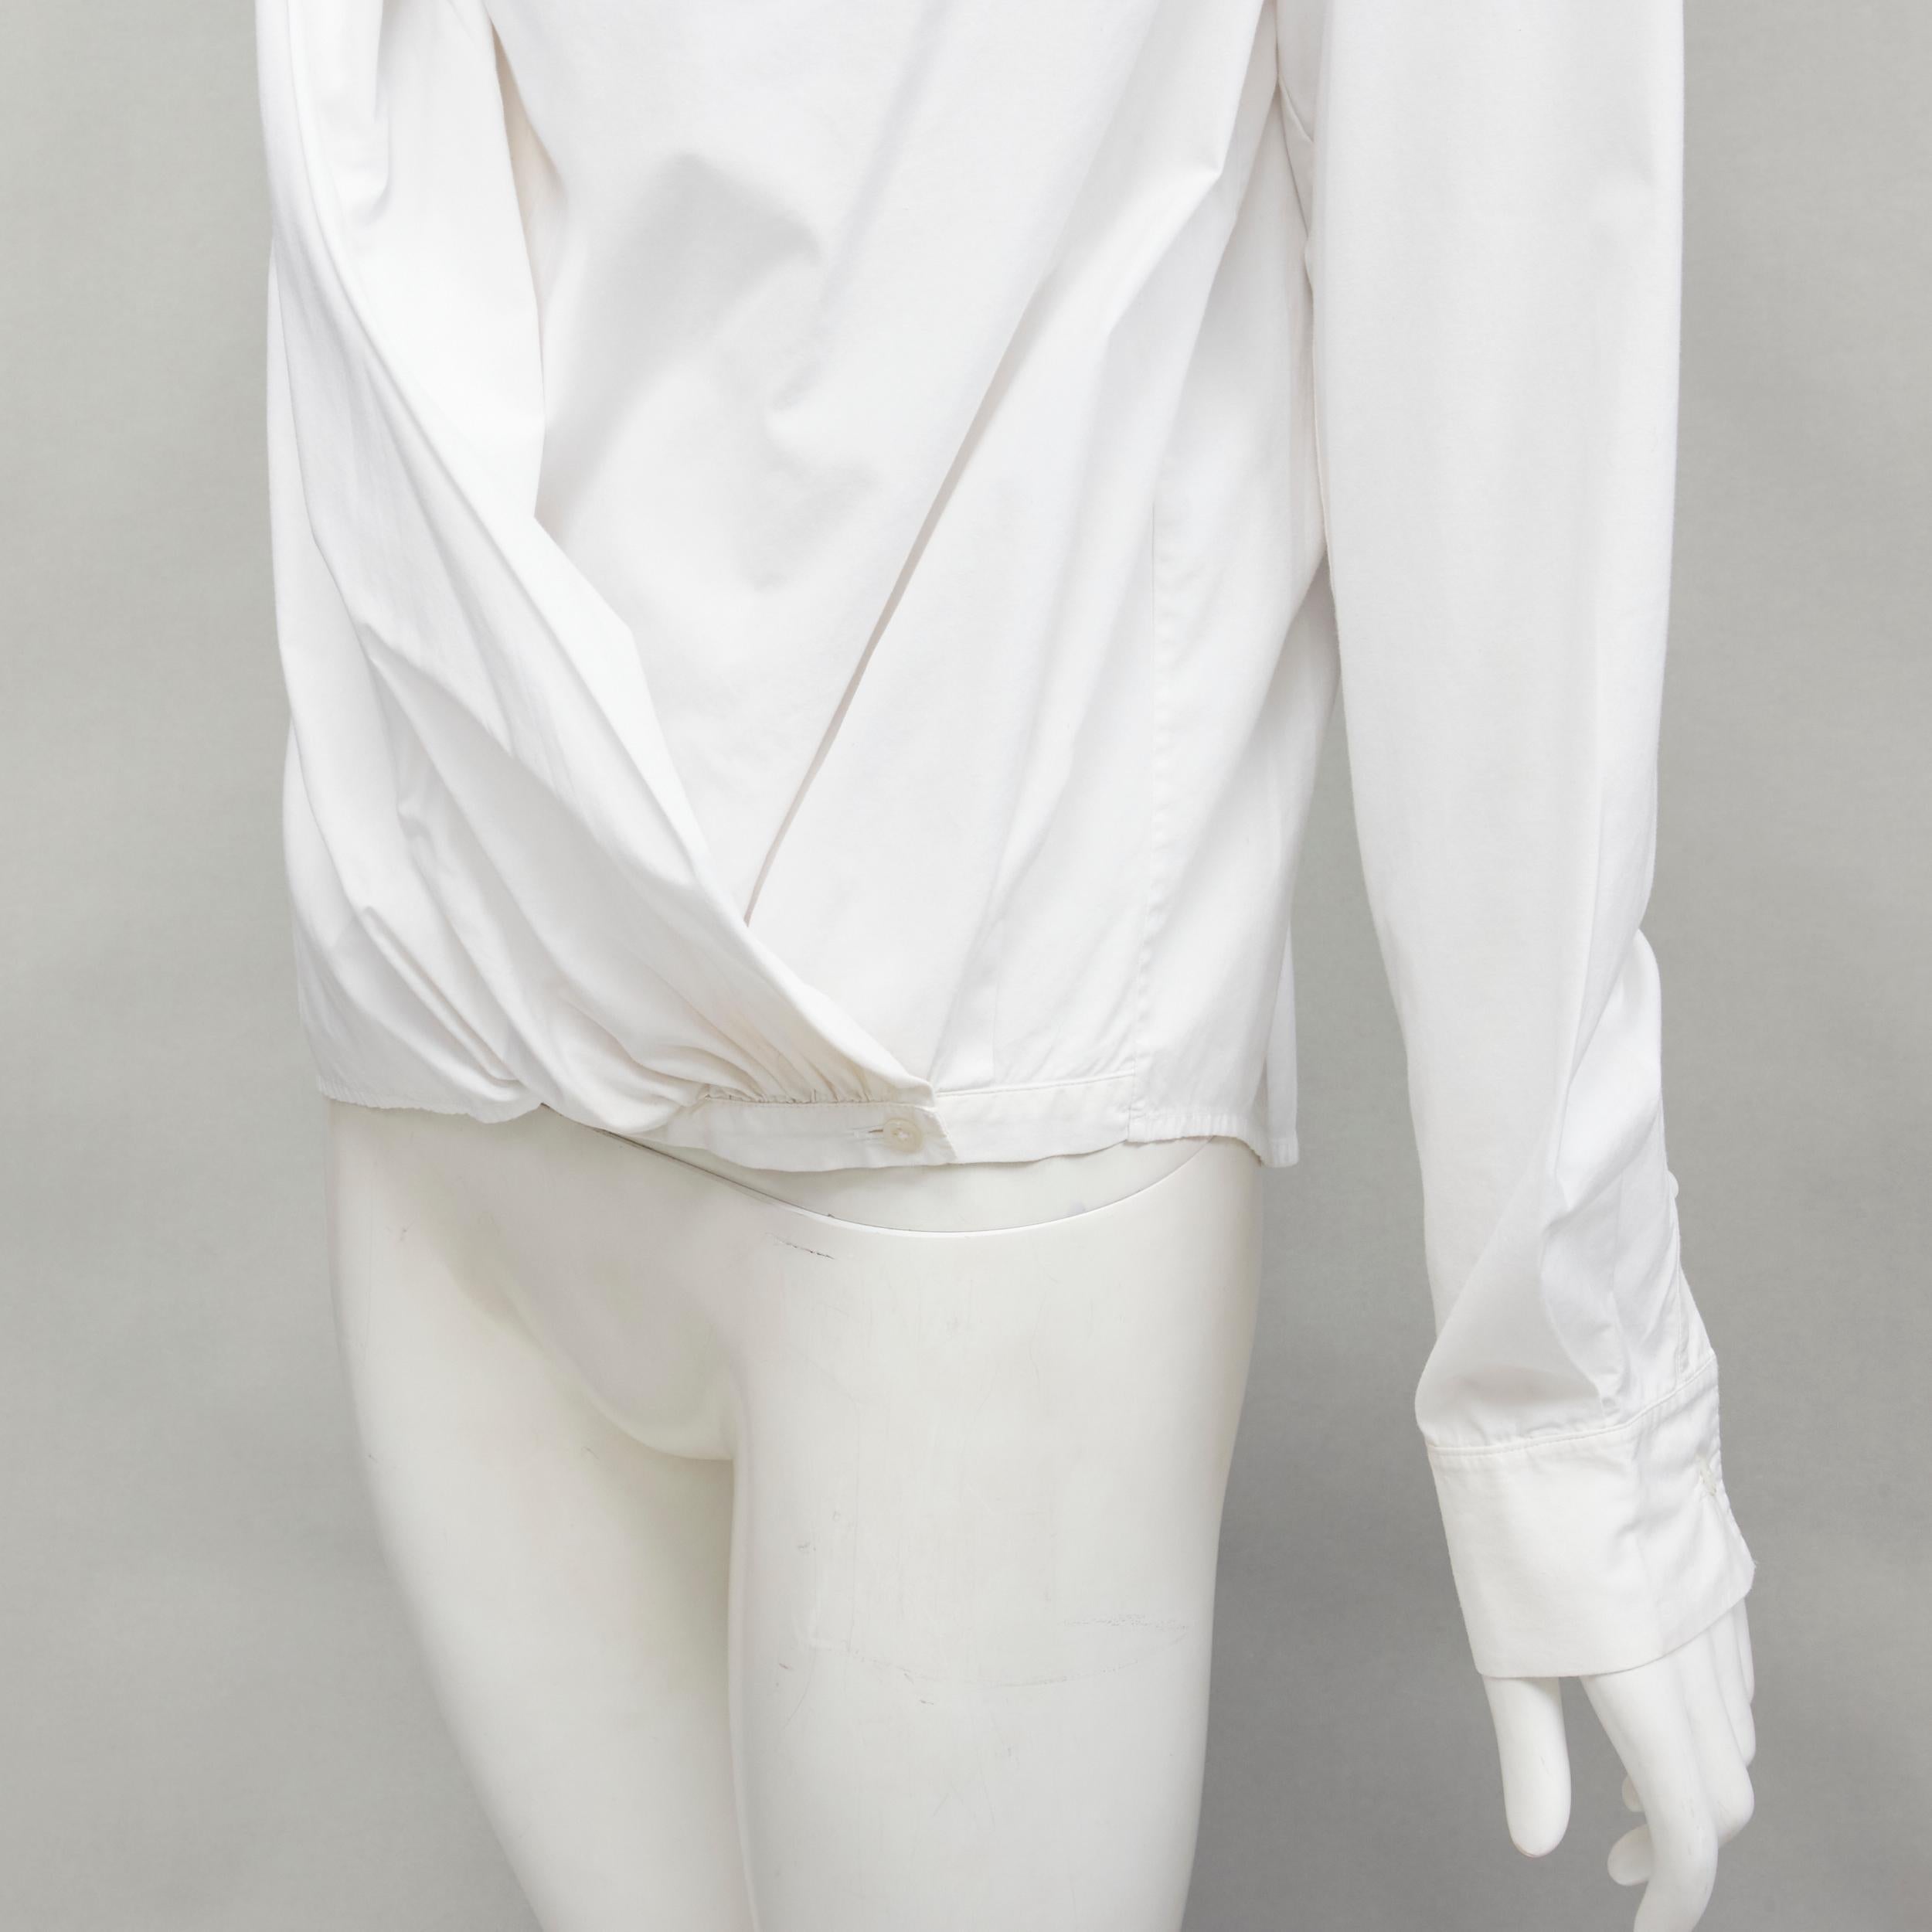 HUSSEIN CHALAYAN white cotton drape asymmetric collar back yoke shirt IT38 XS
Reference: YNWG/A00123
Brand: Hussein Chalayan
Material: Cotton
Color: White
Pattern: Solid
Closure: Button
Made in: China

CONDITION:
Condition: Good, this item was